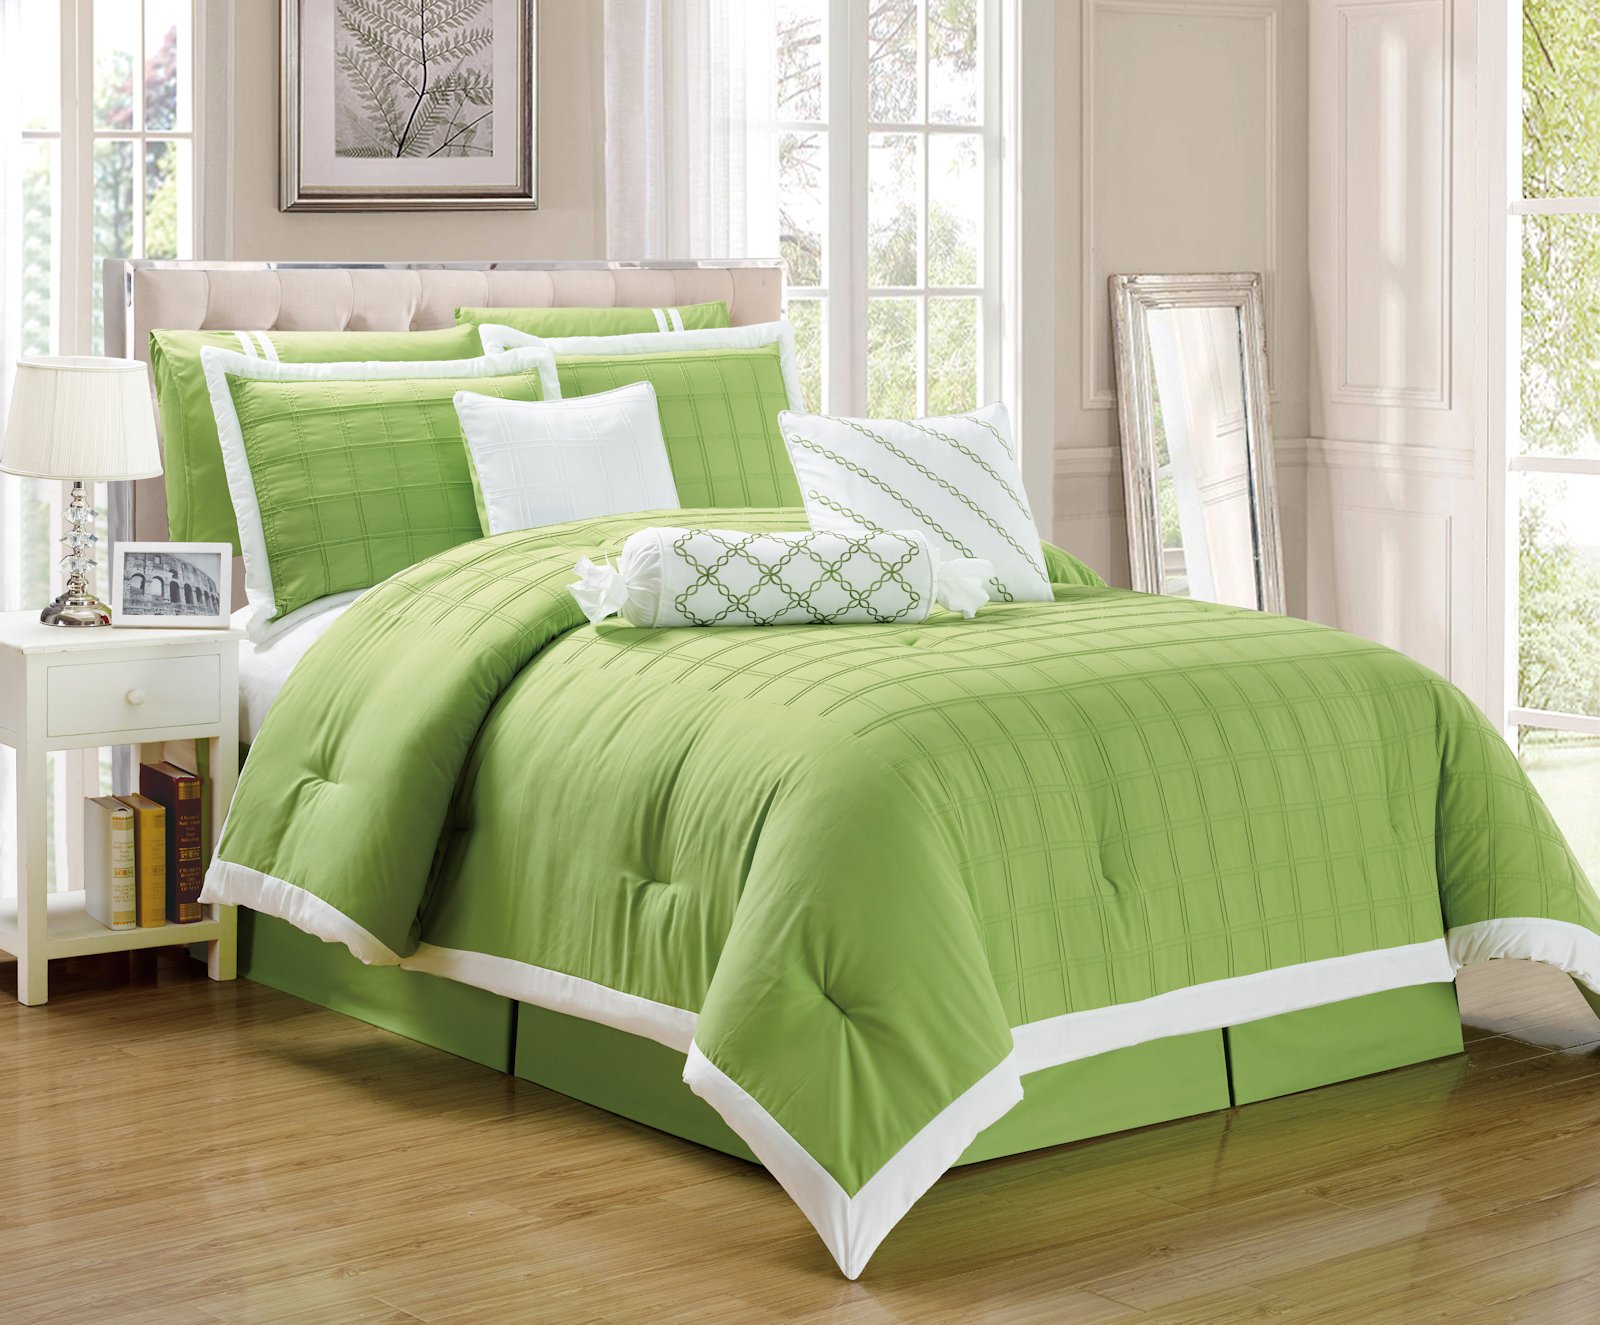 9 Pc Pleated Microfiber Comforter Set, Lime Green King Size Bedding Sets